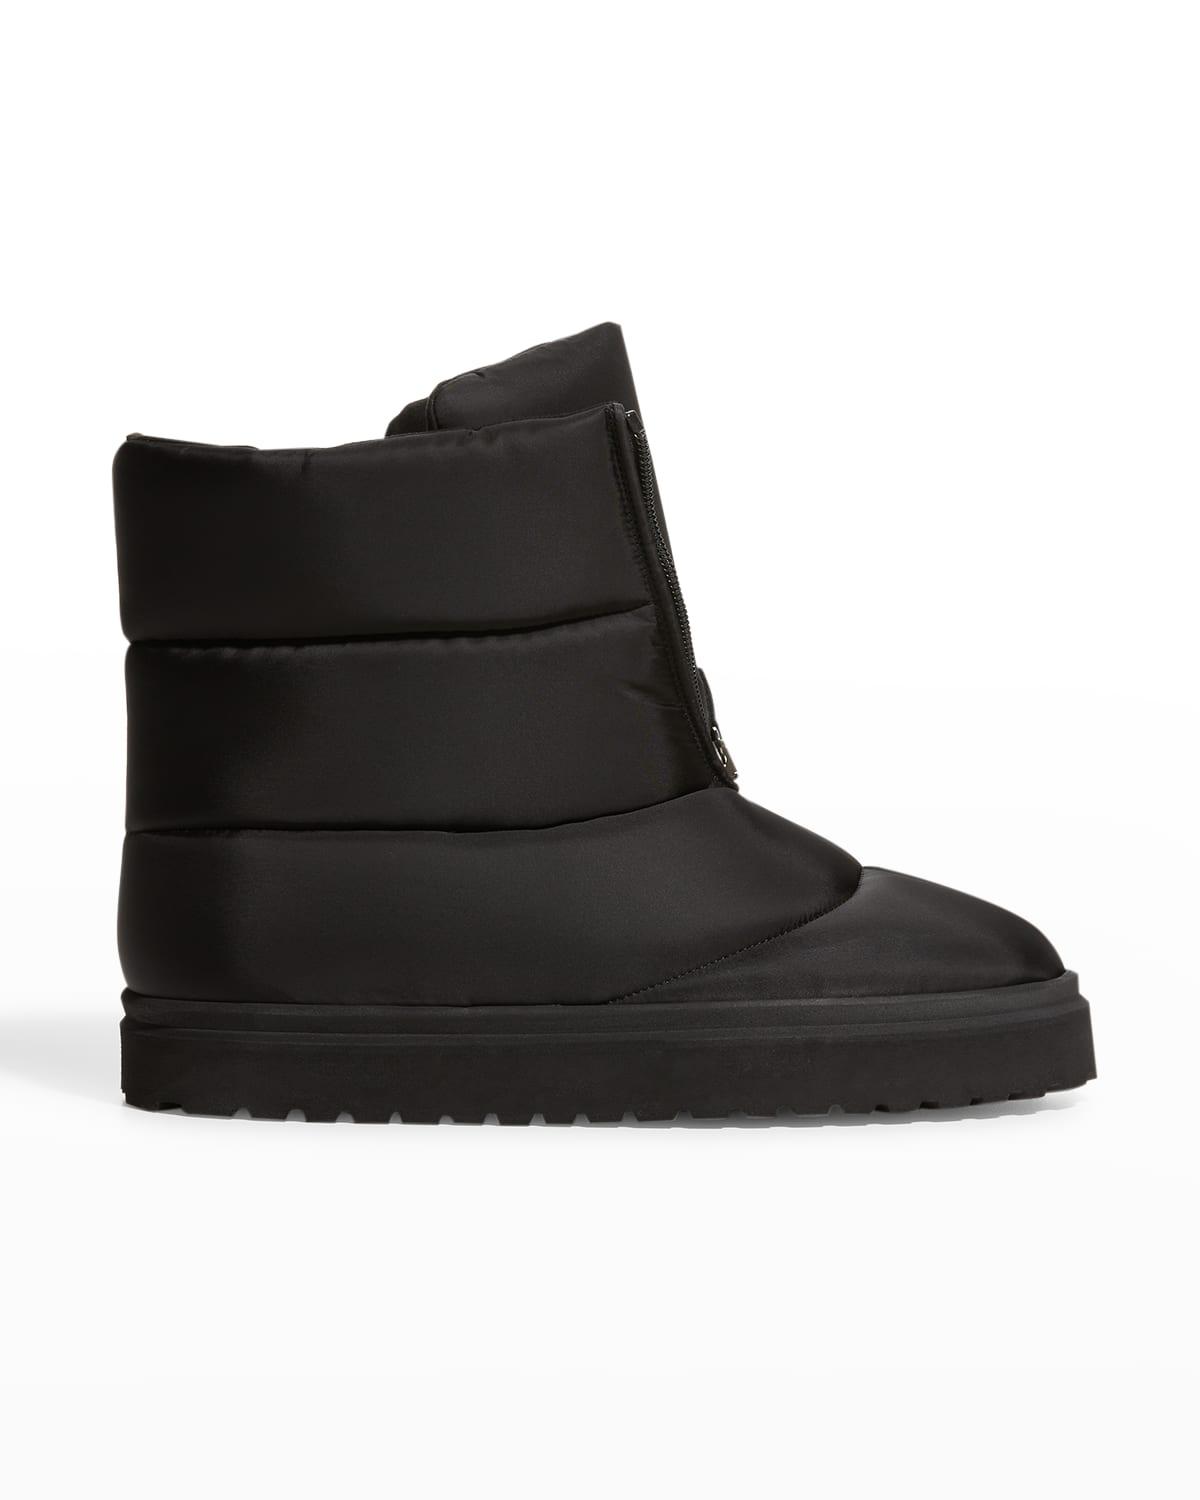 GIA X PERNILLE Puffy Nylon Short Boots in Black | Lyst